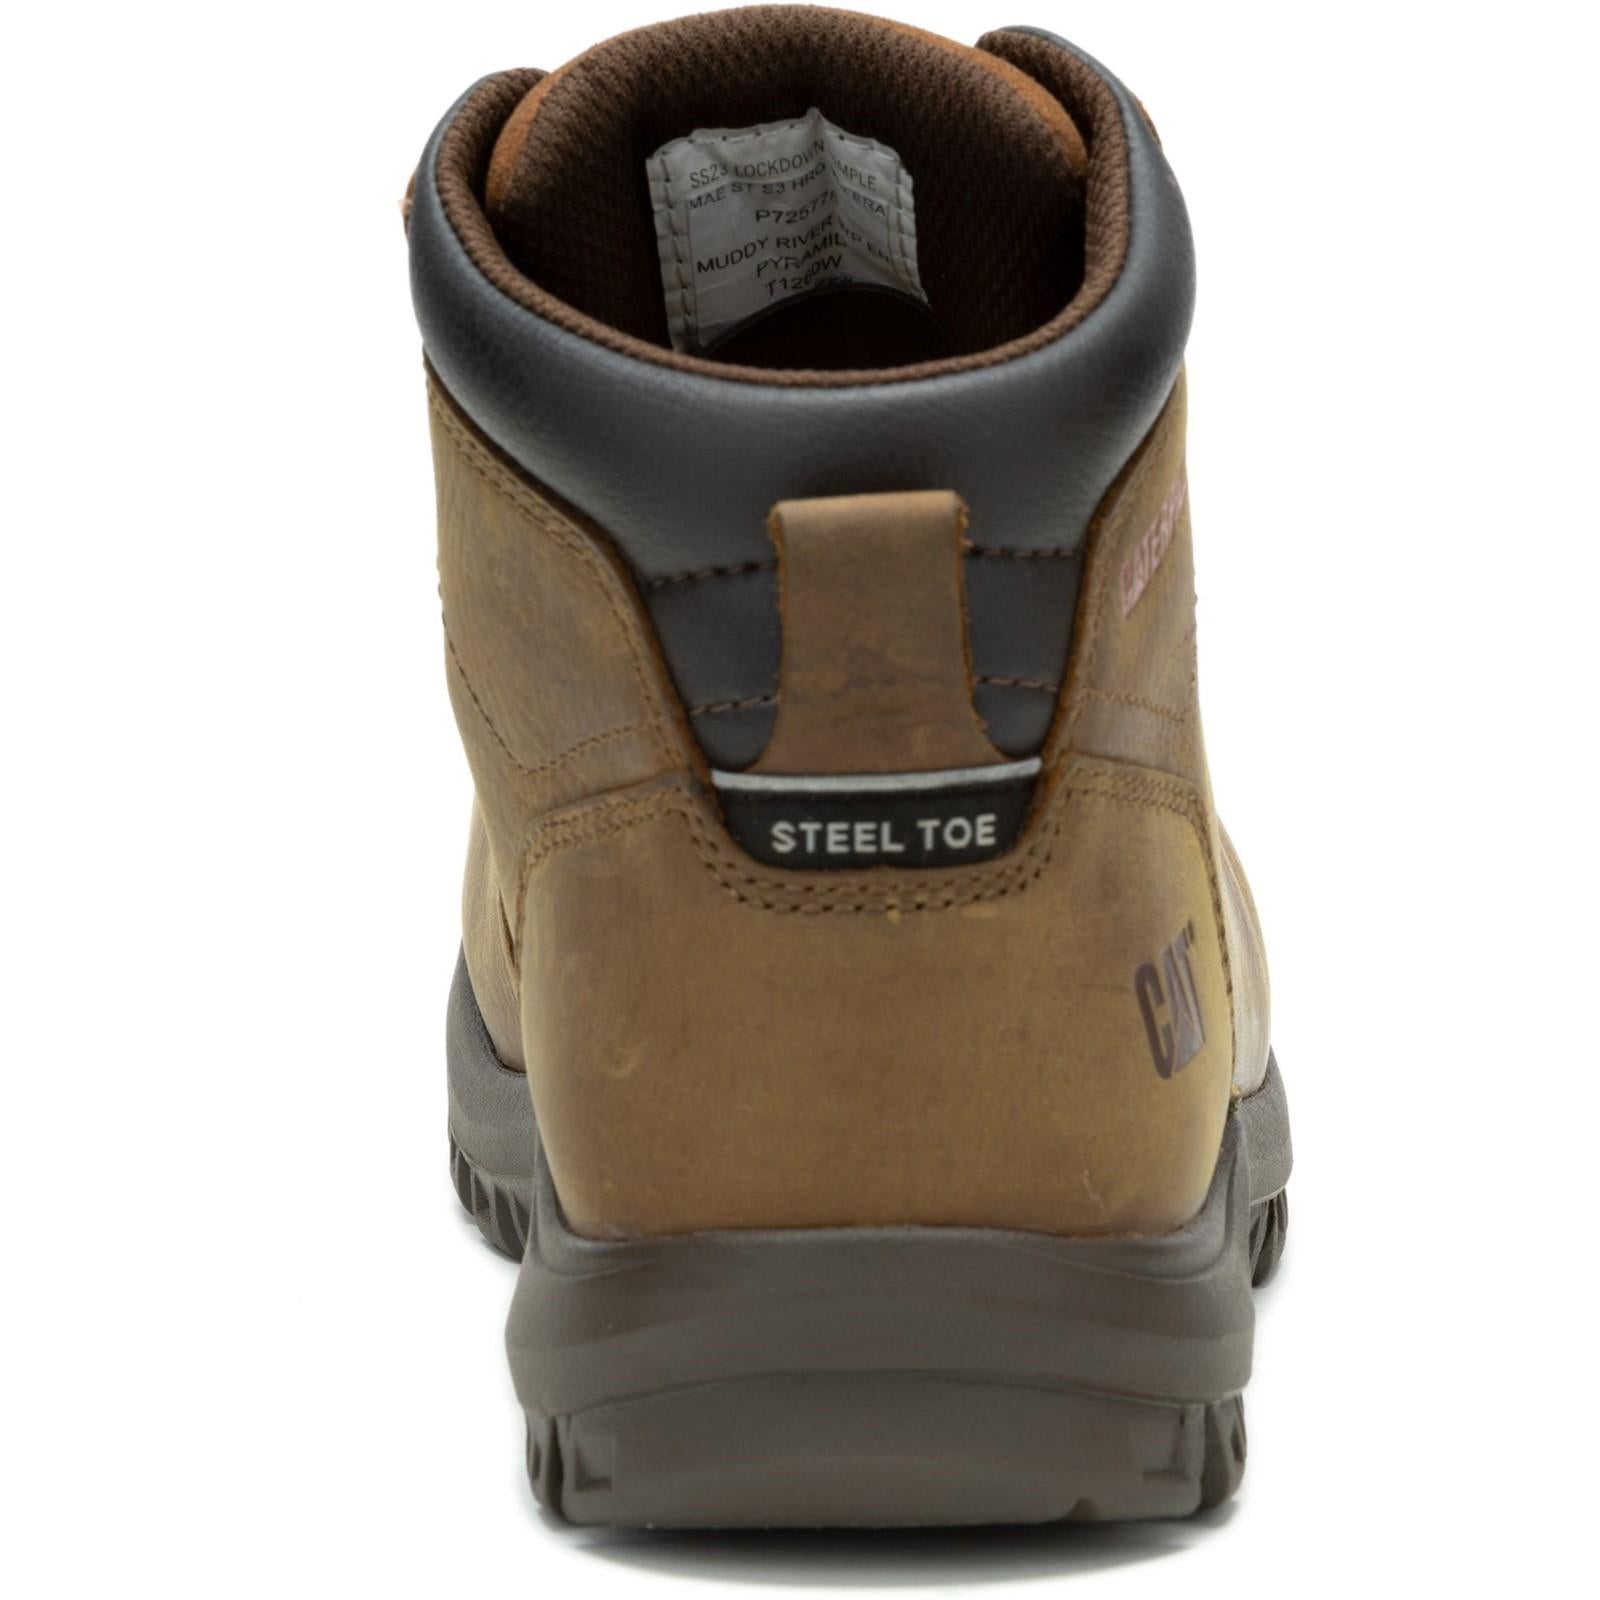 Cat Workwear Mae Safety Boot